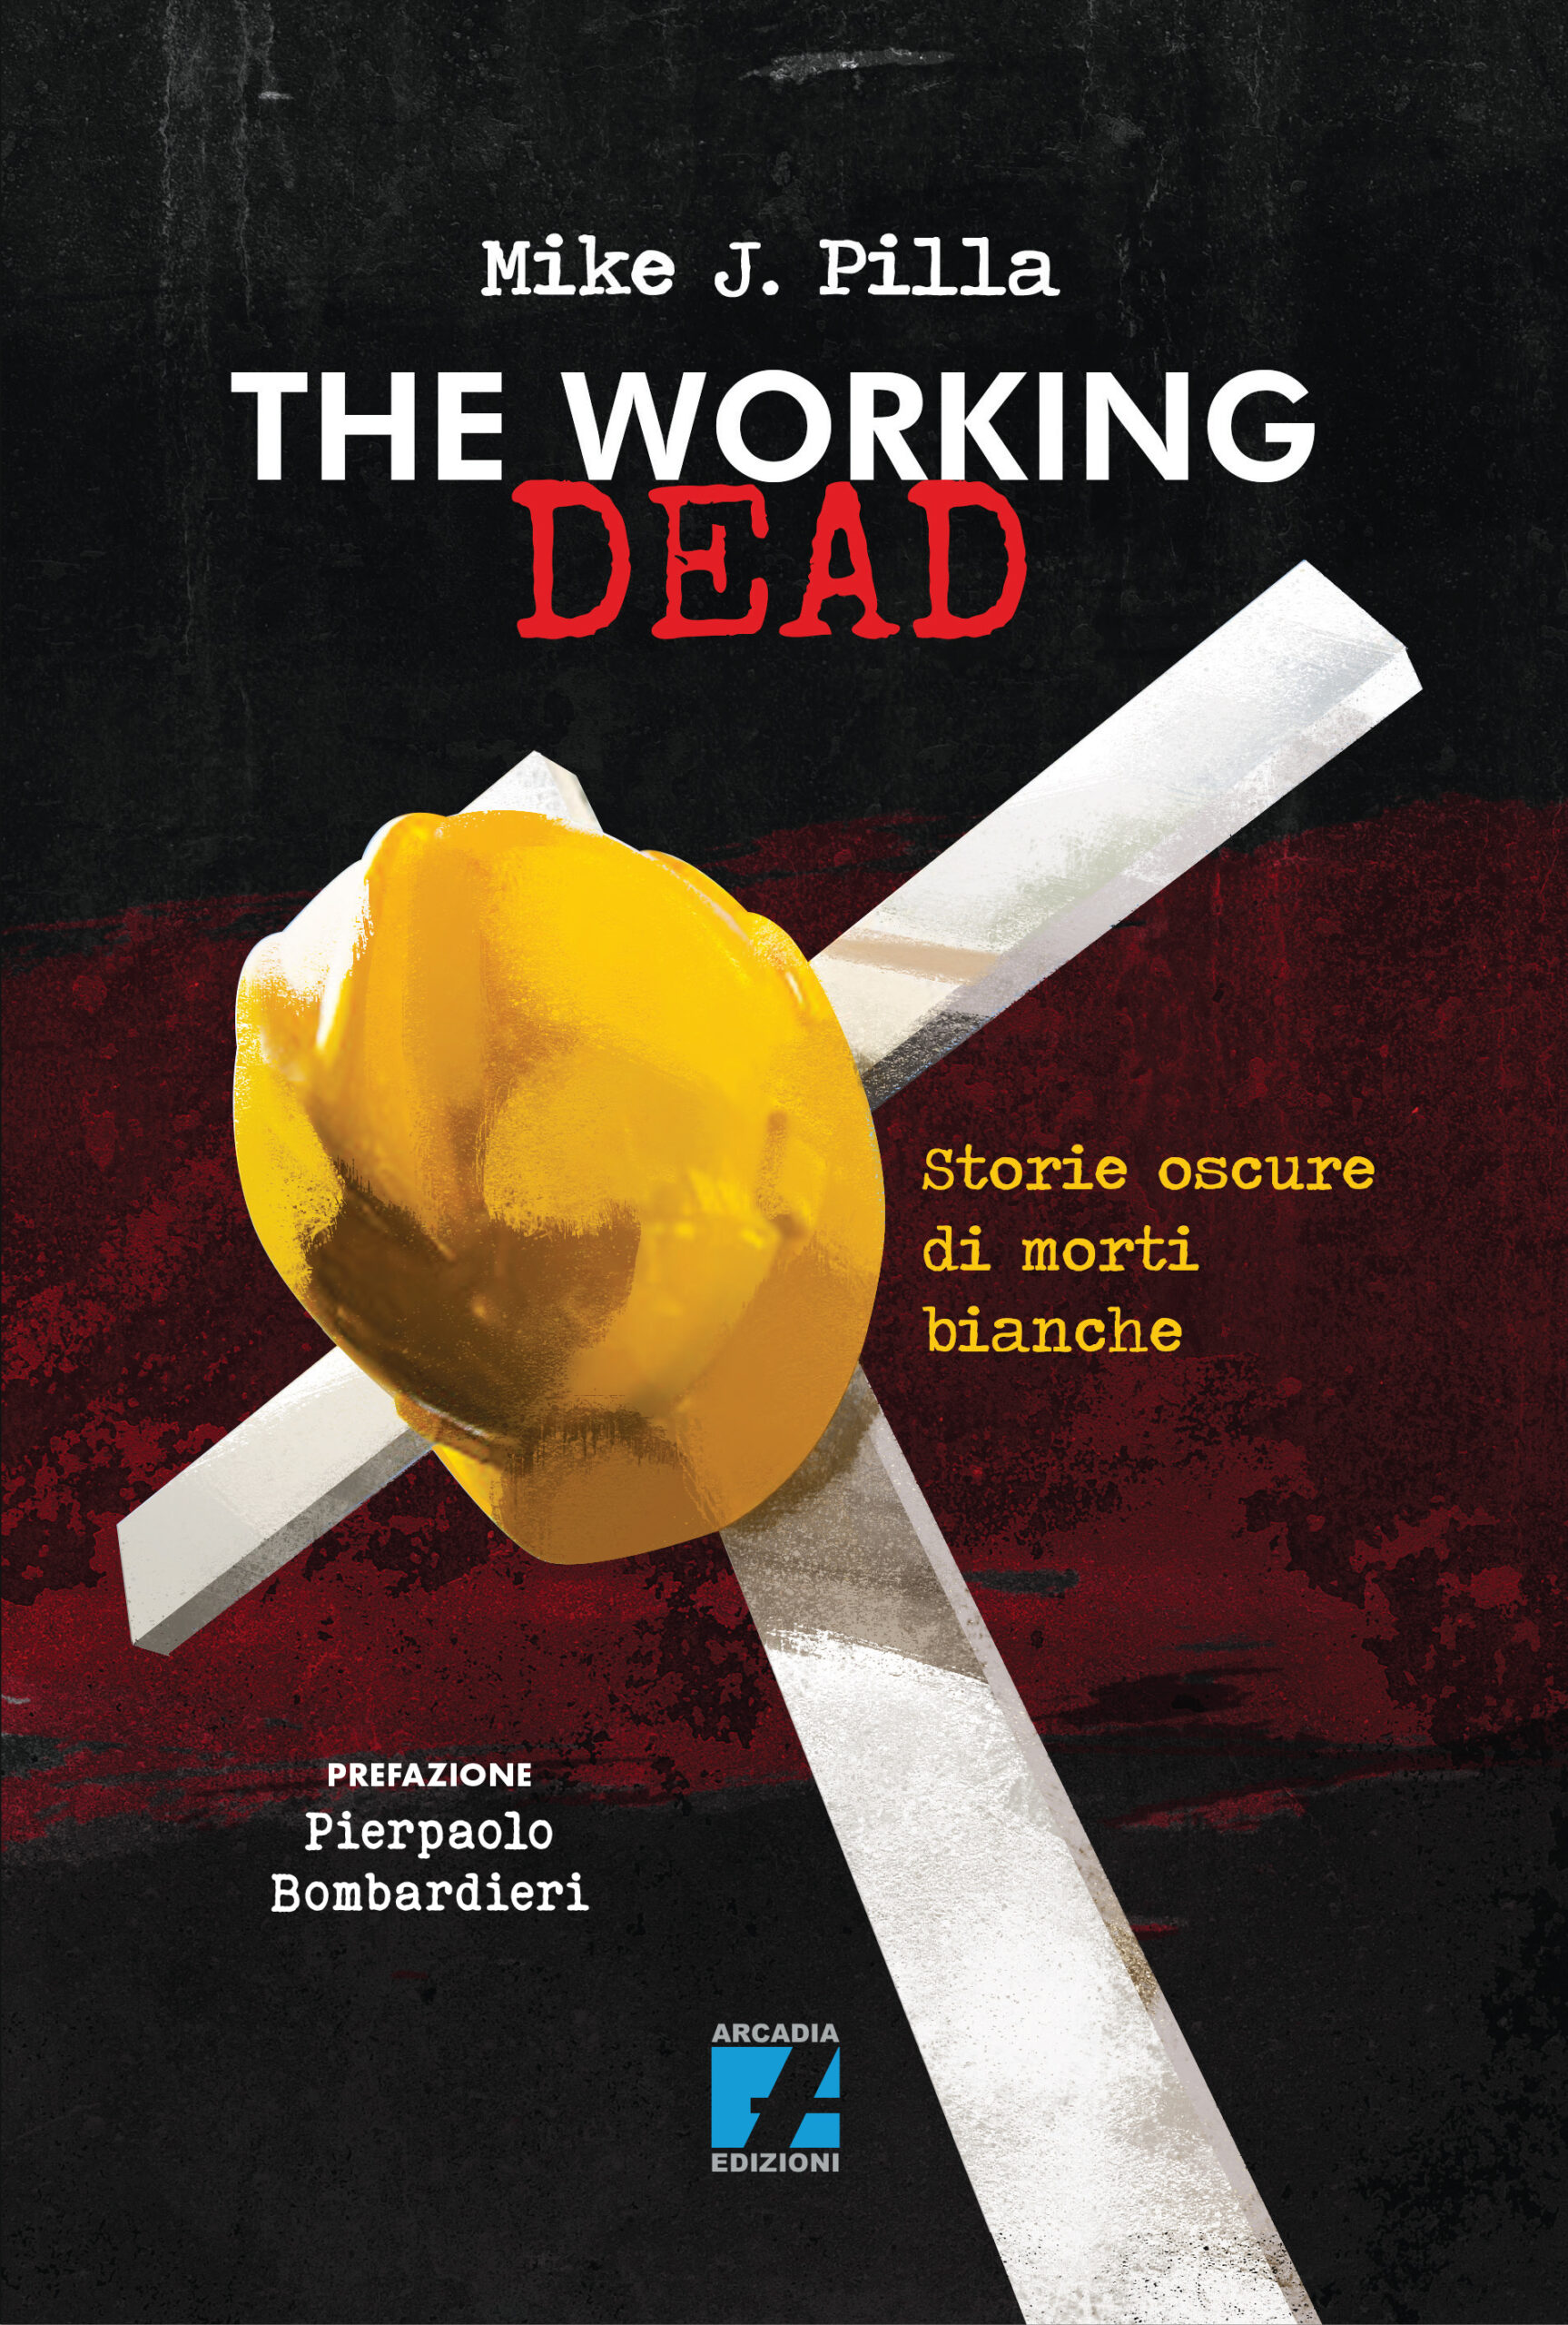 The working dead